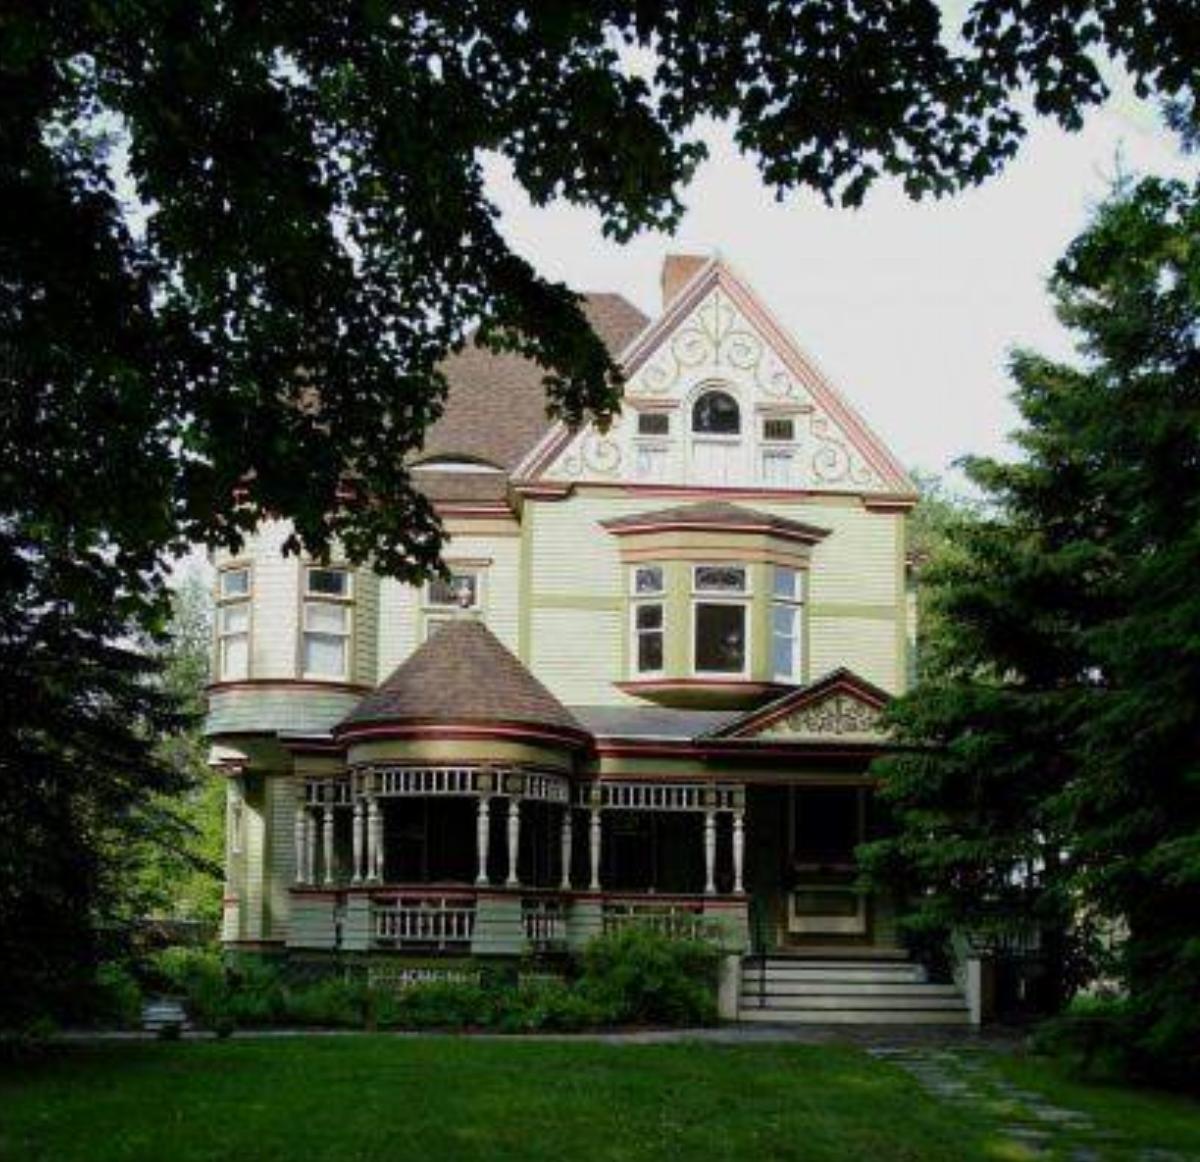 Estabrook House Bed and Breakfast